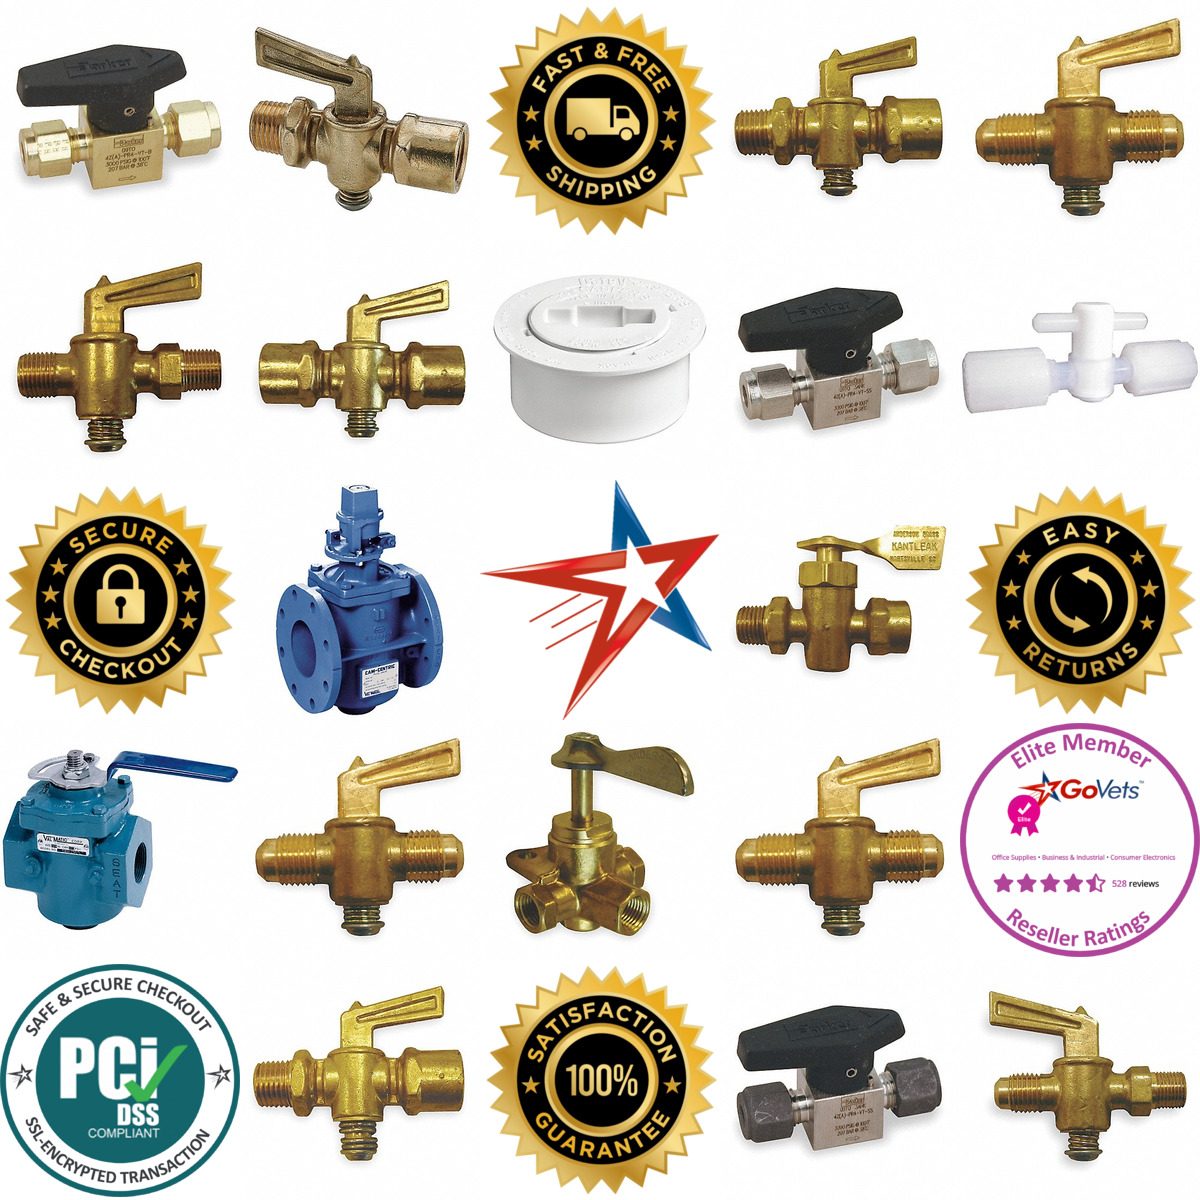 A selection of Plug Valves products on GoVets